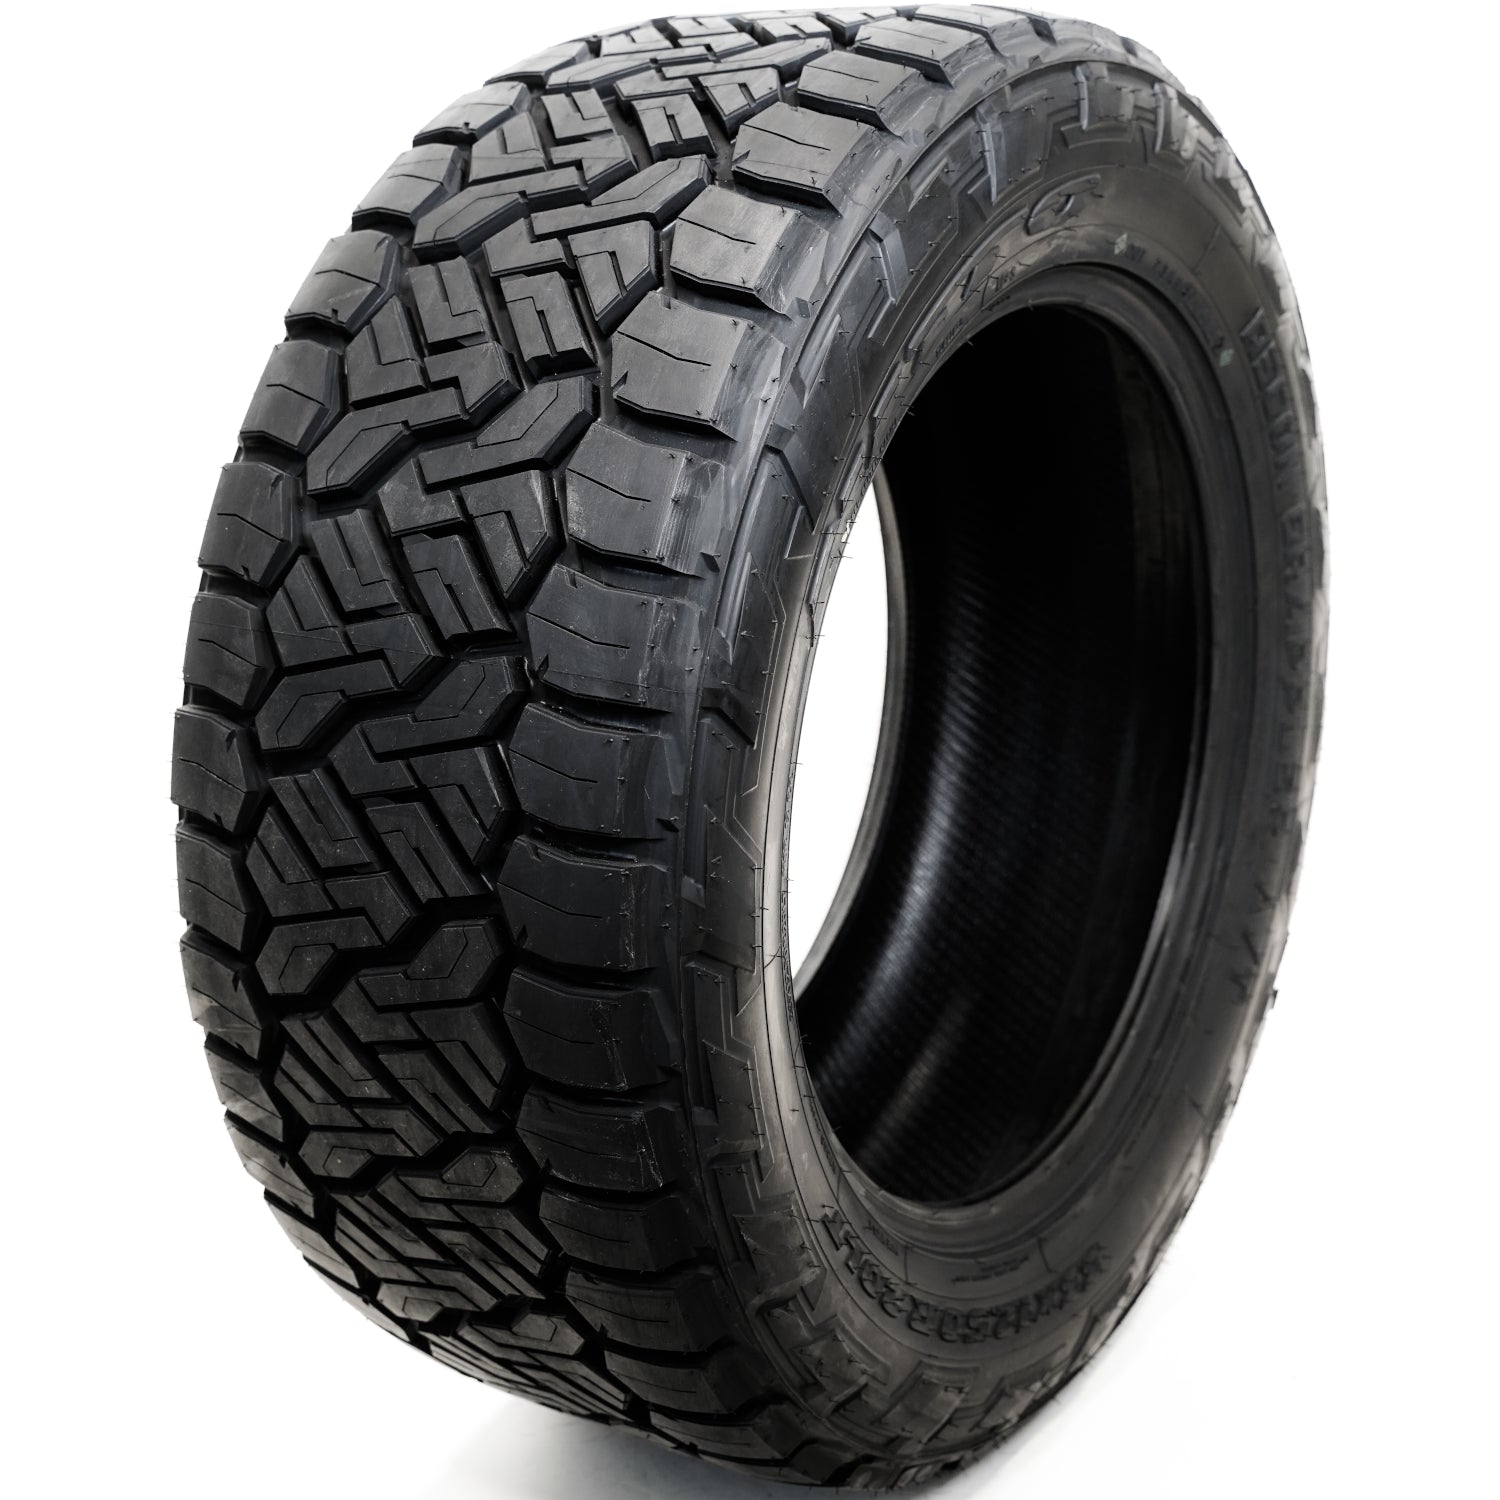 NITTO RECON GRAPPLER A/T LT37X11.50R17 Tires